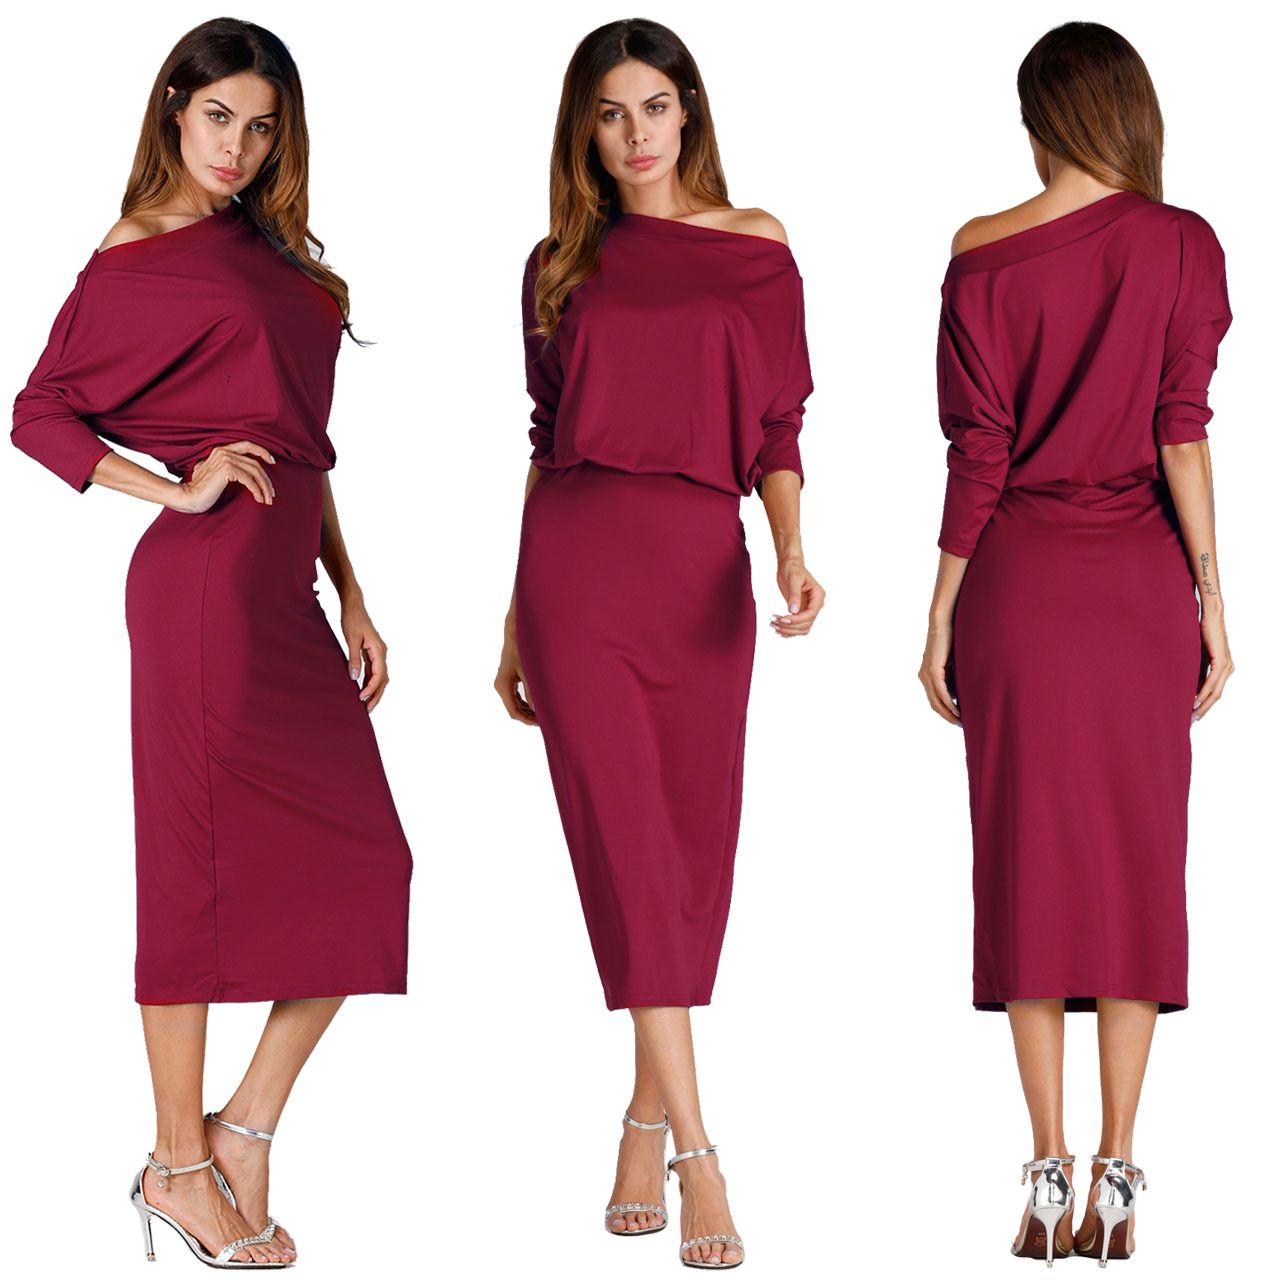 red dress for plus size ladies